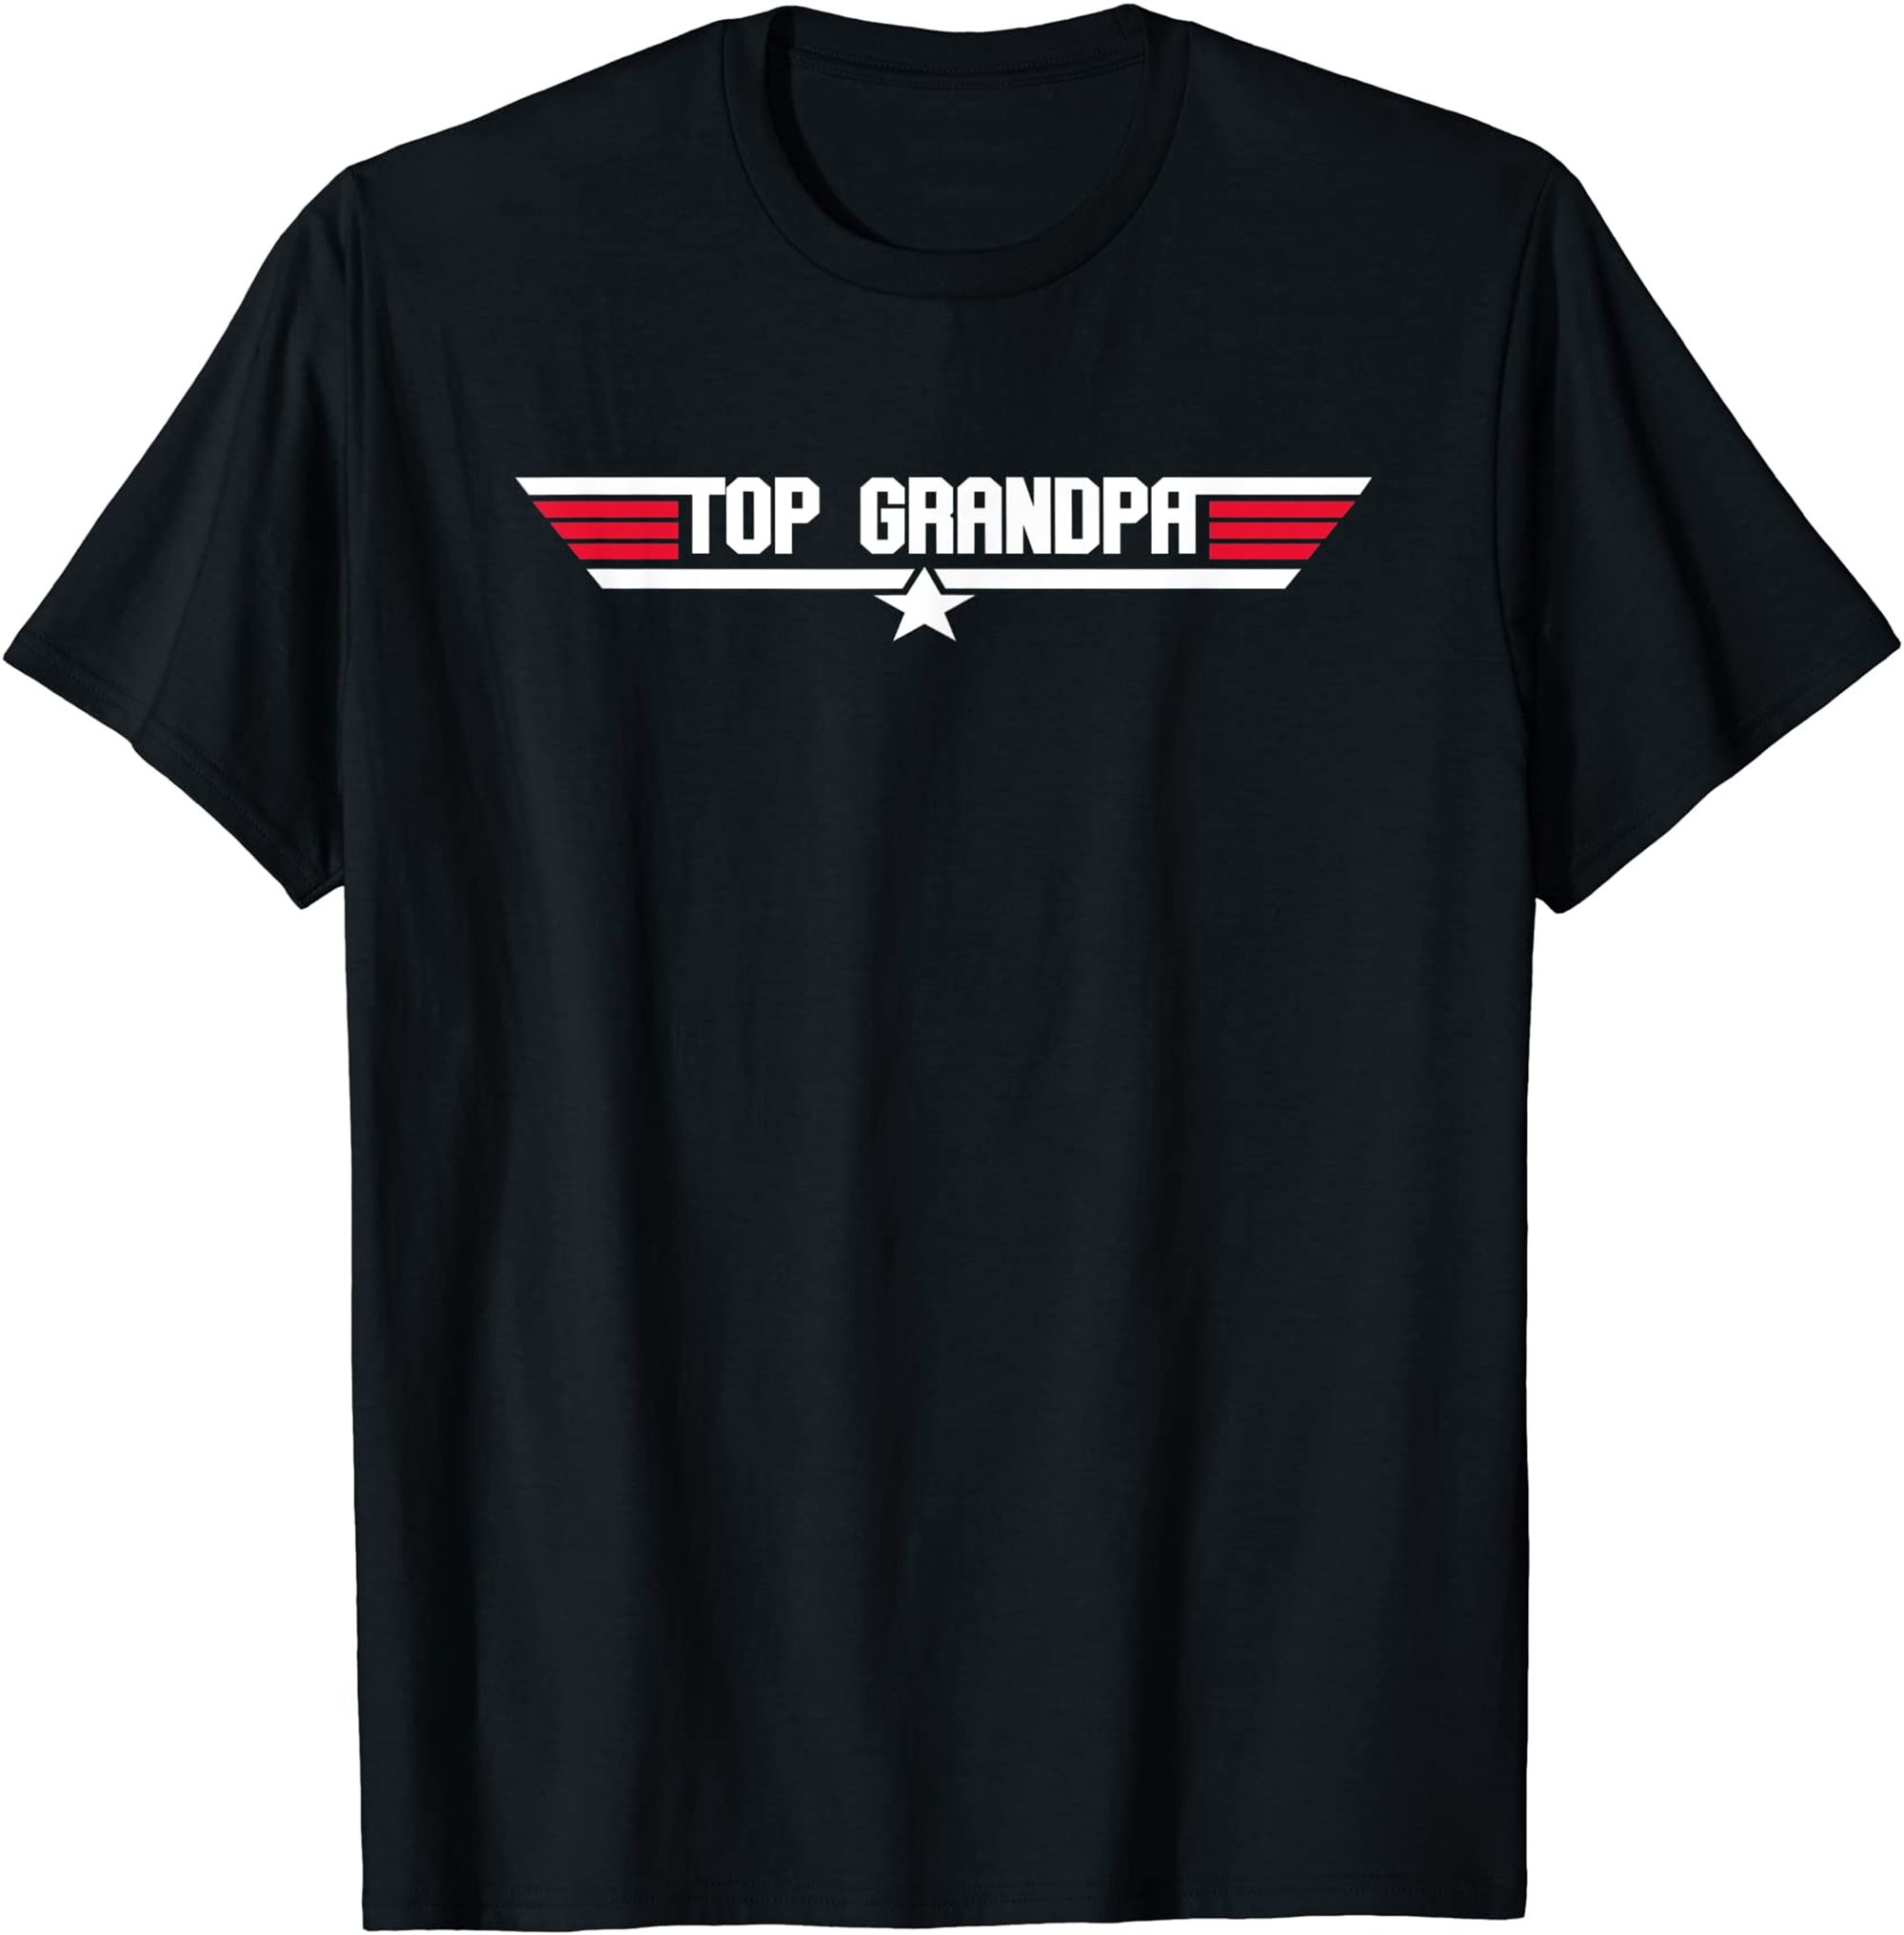 Top Grandpa Funny Grandfather 80s Fathers Day Gift T-shirt Plus Size Up To 5xl